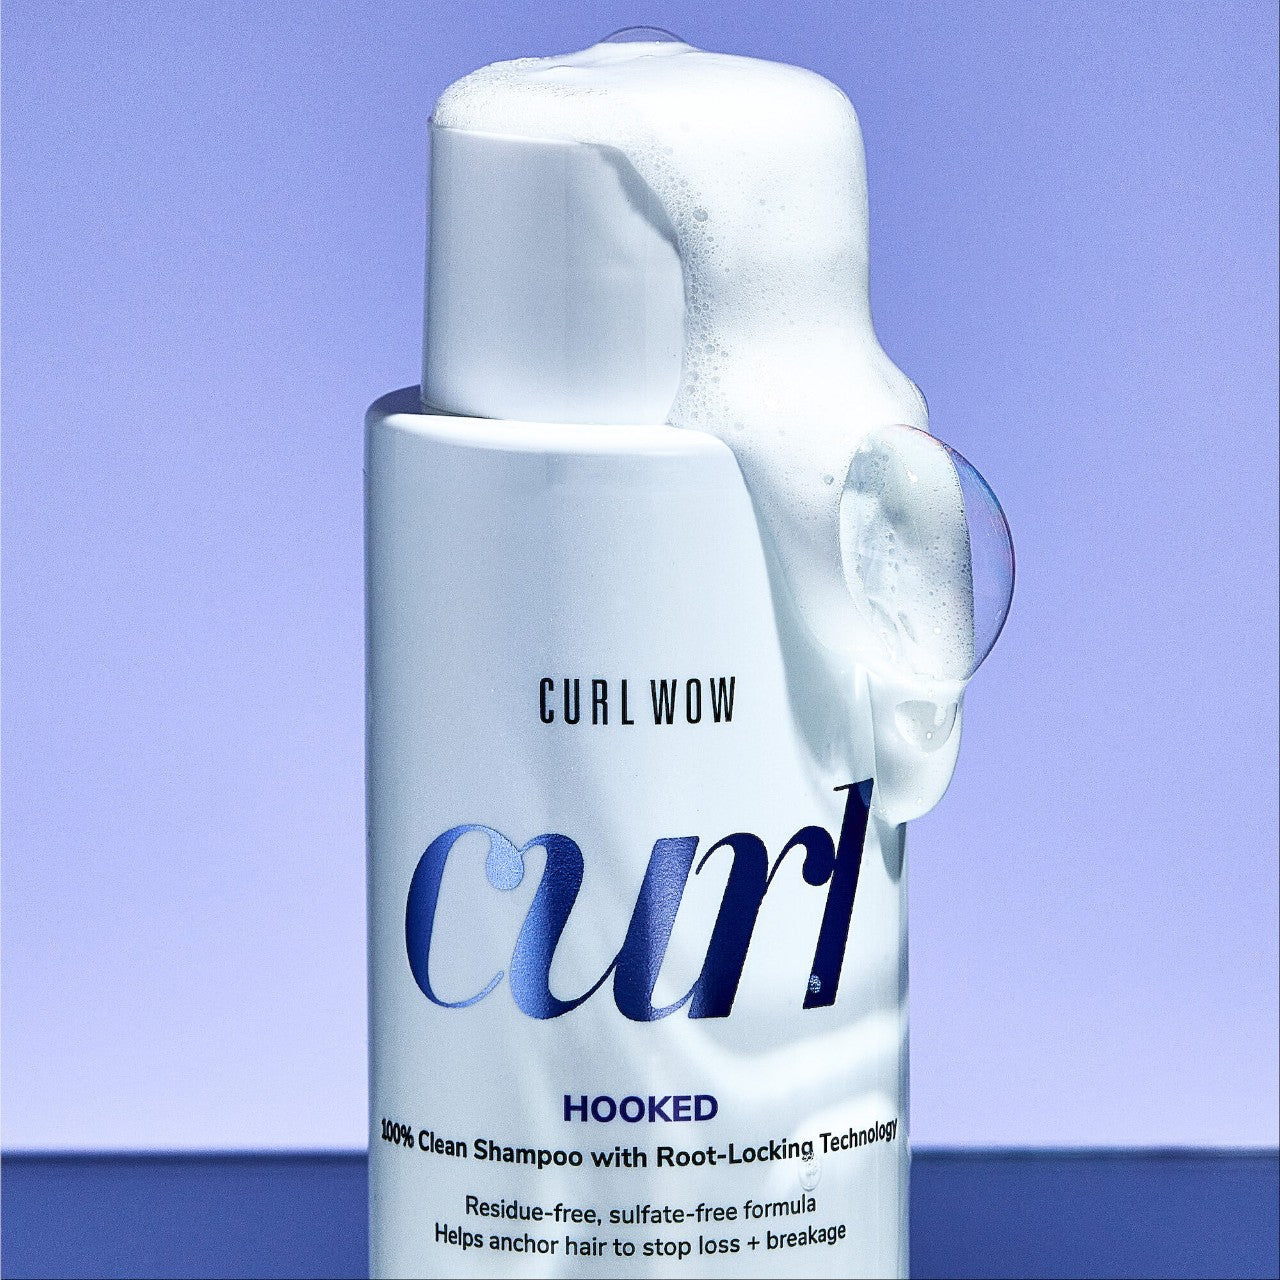 Curl Wow Hooked 100% Clean Shampoo with Root-Locking Technology for Curly Coily Hair